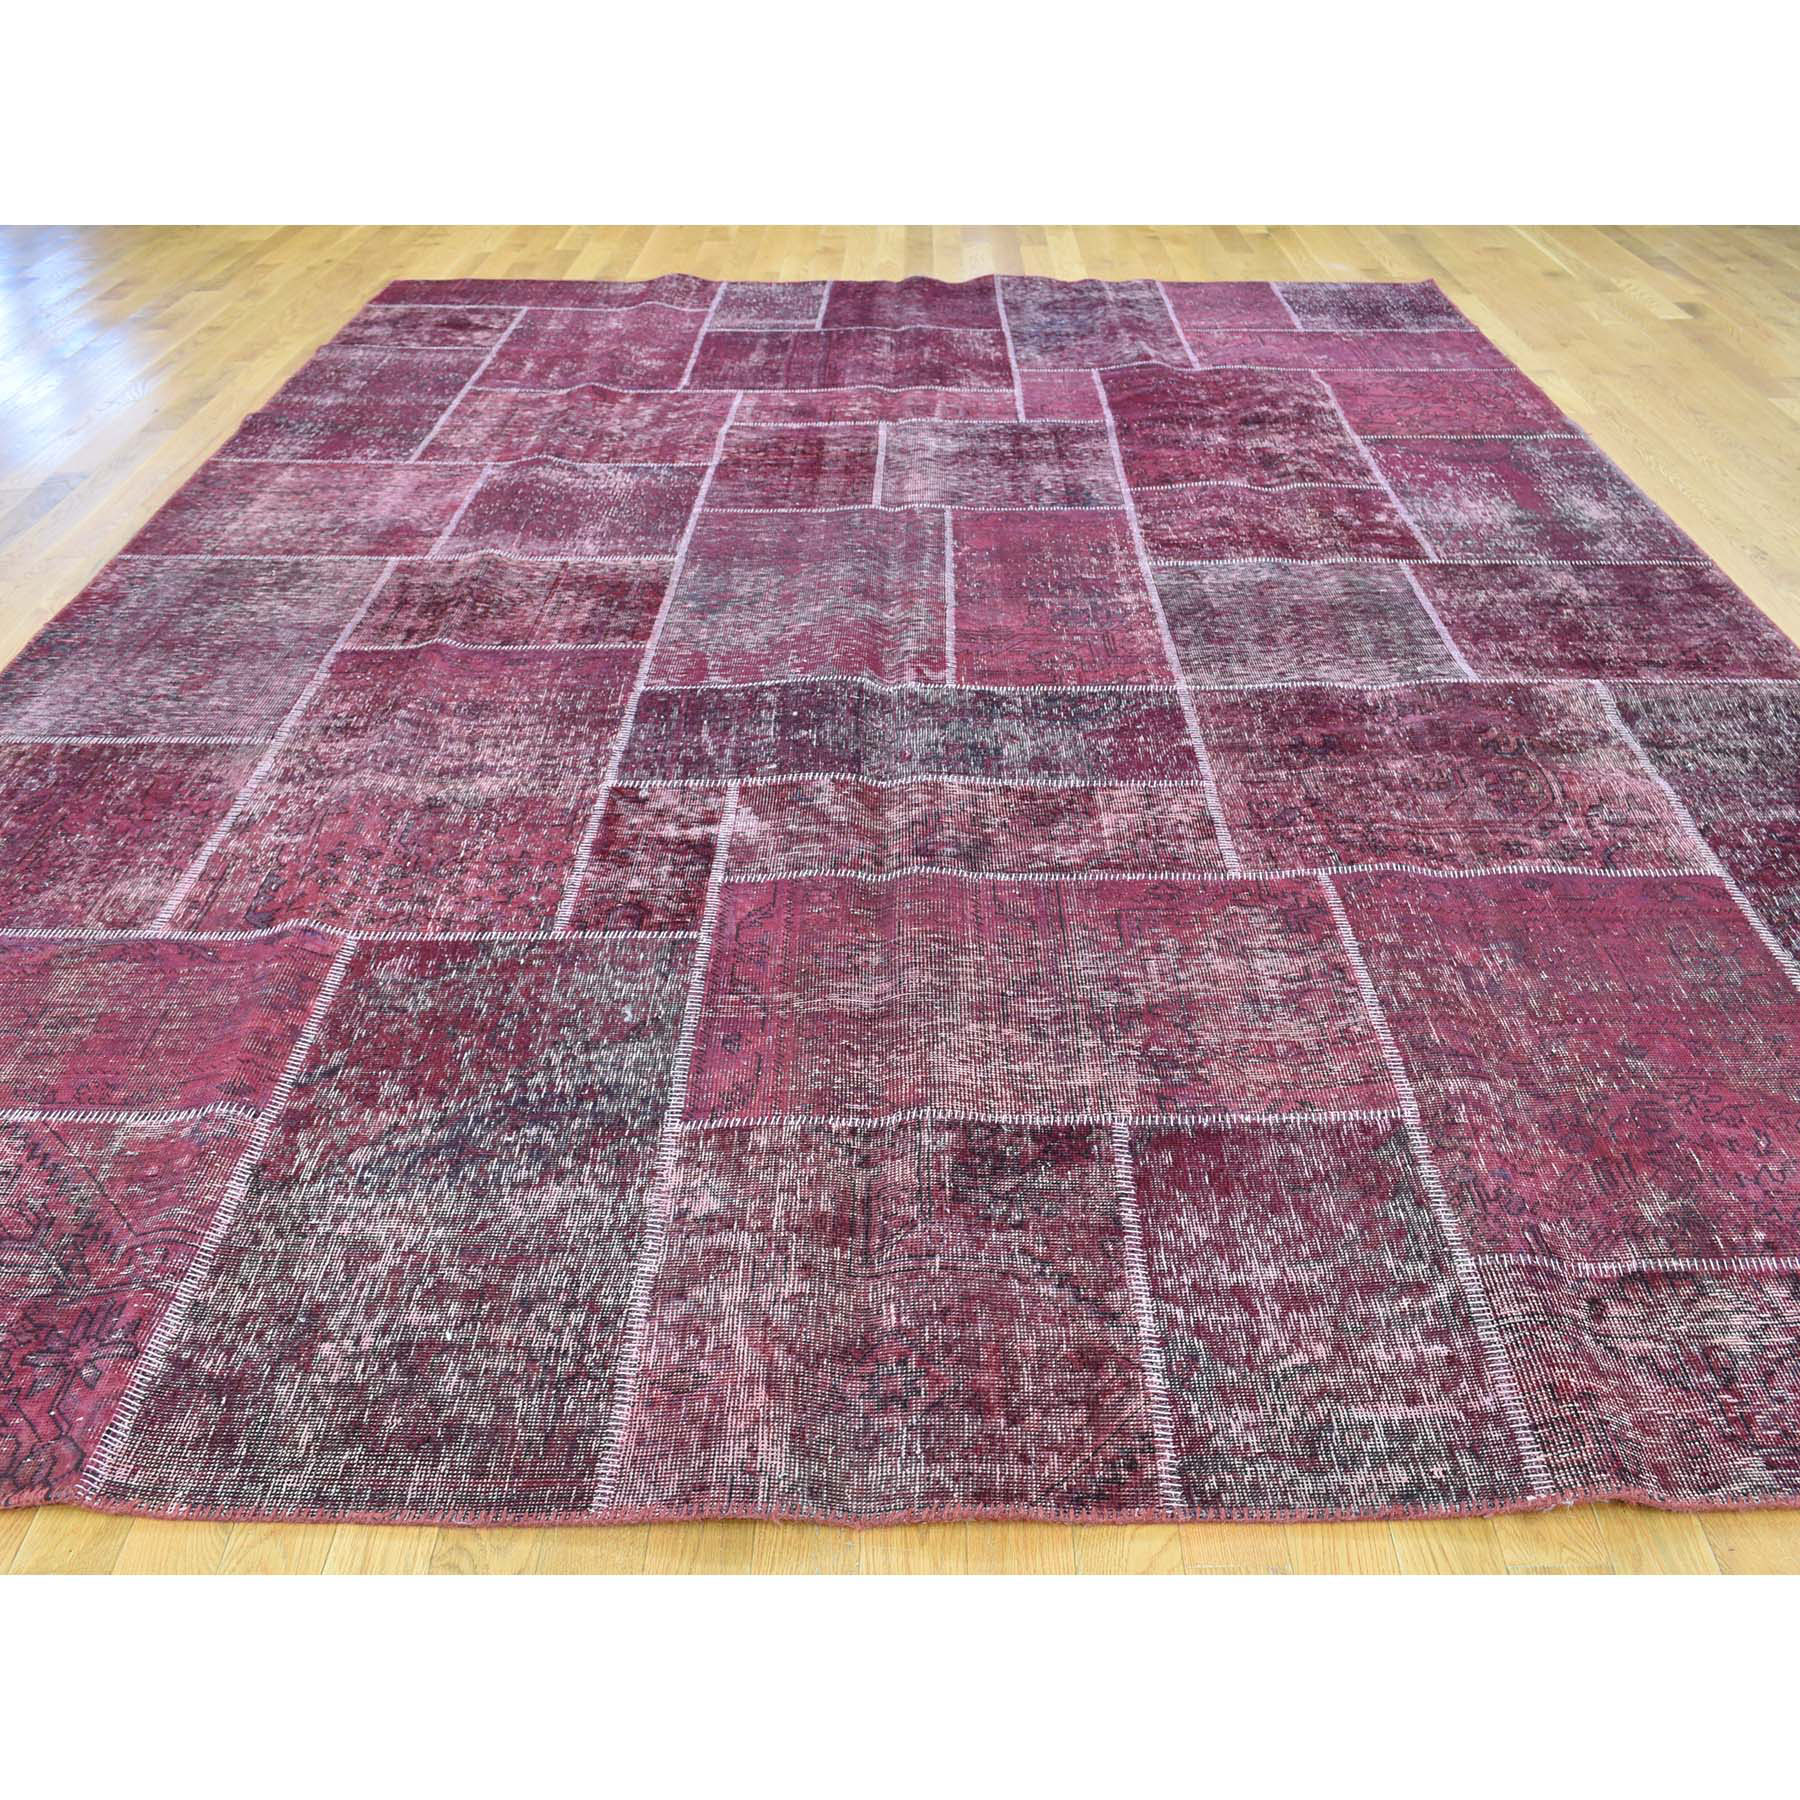 9-1 x12-10  Persian Overdyed Patchwork Handmade Pure Wool Vintage Carpet 